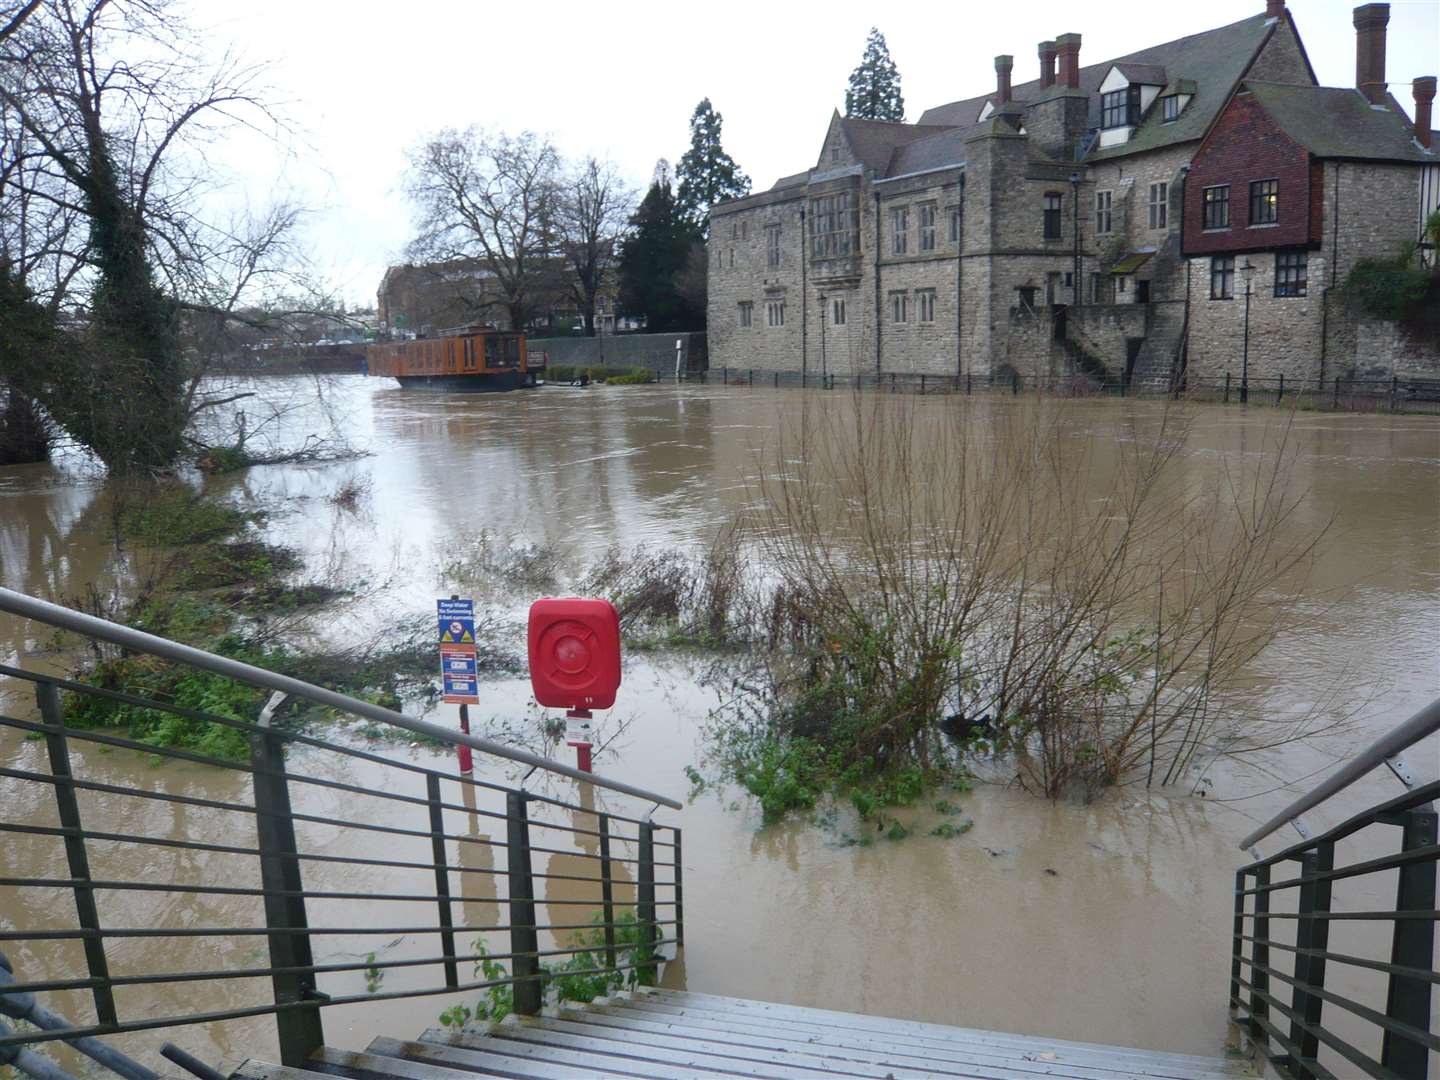 The flooded River Medway in the Lockmeadow area and near the bridge system in Maidstone